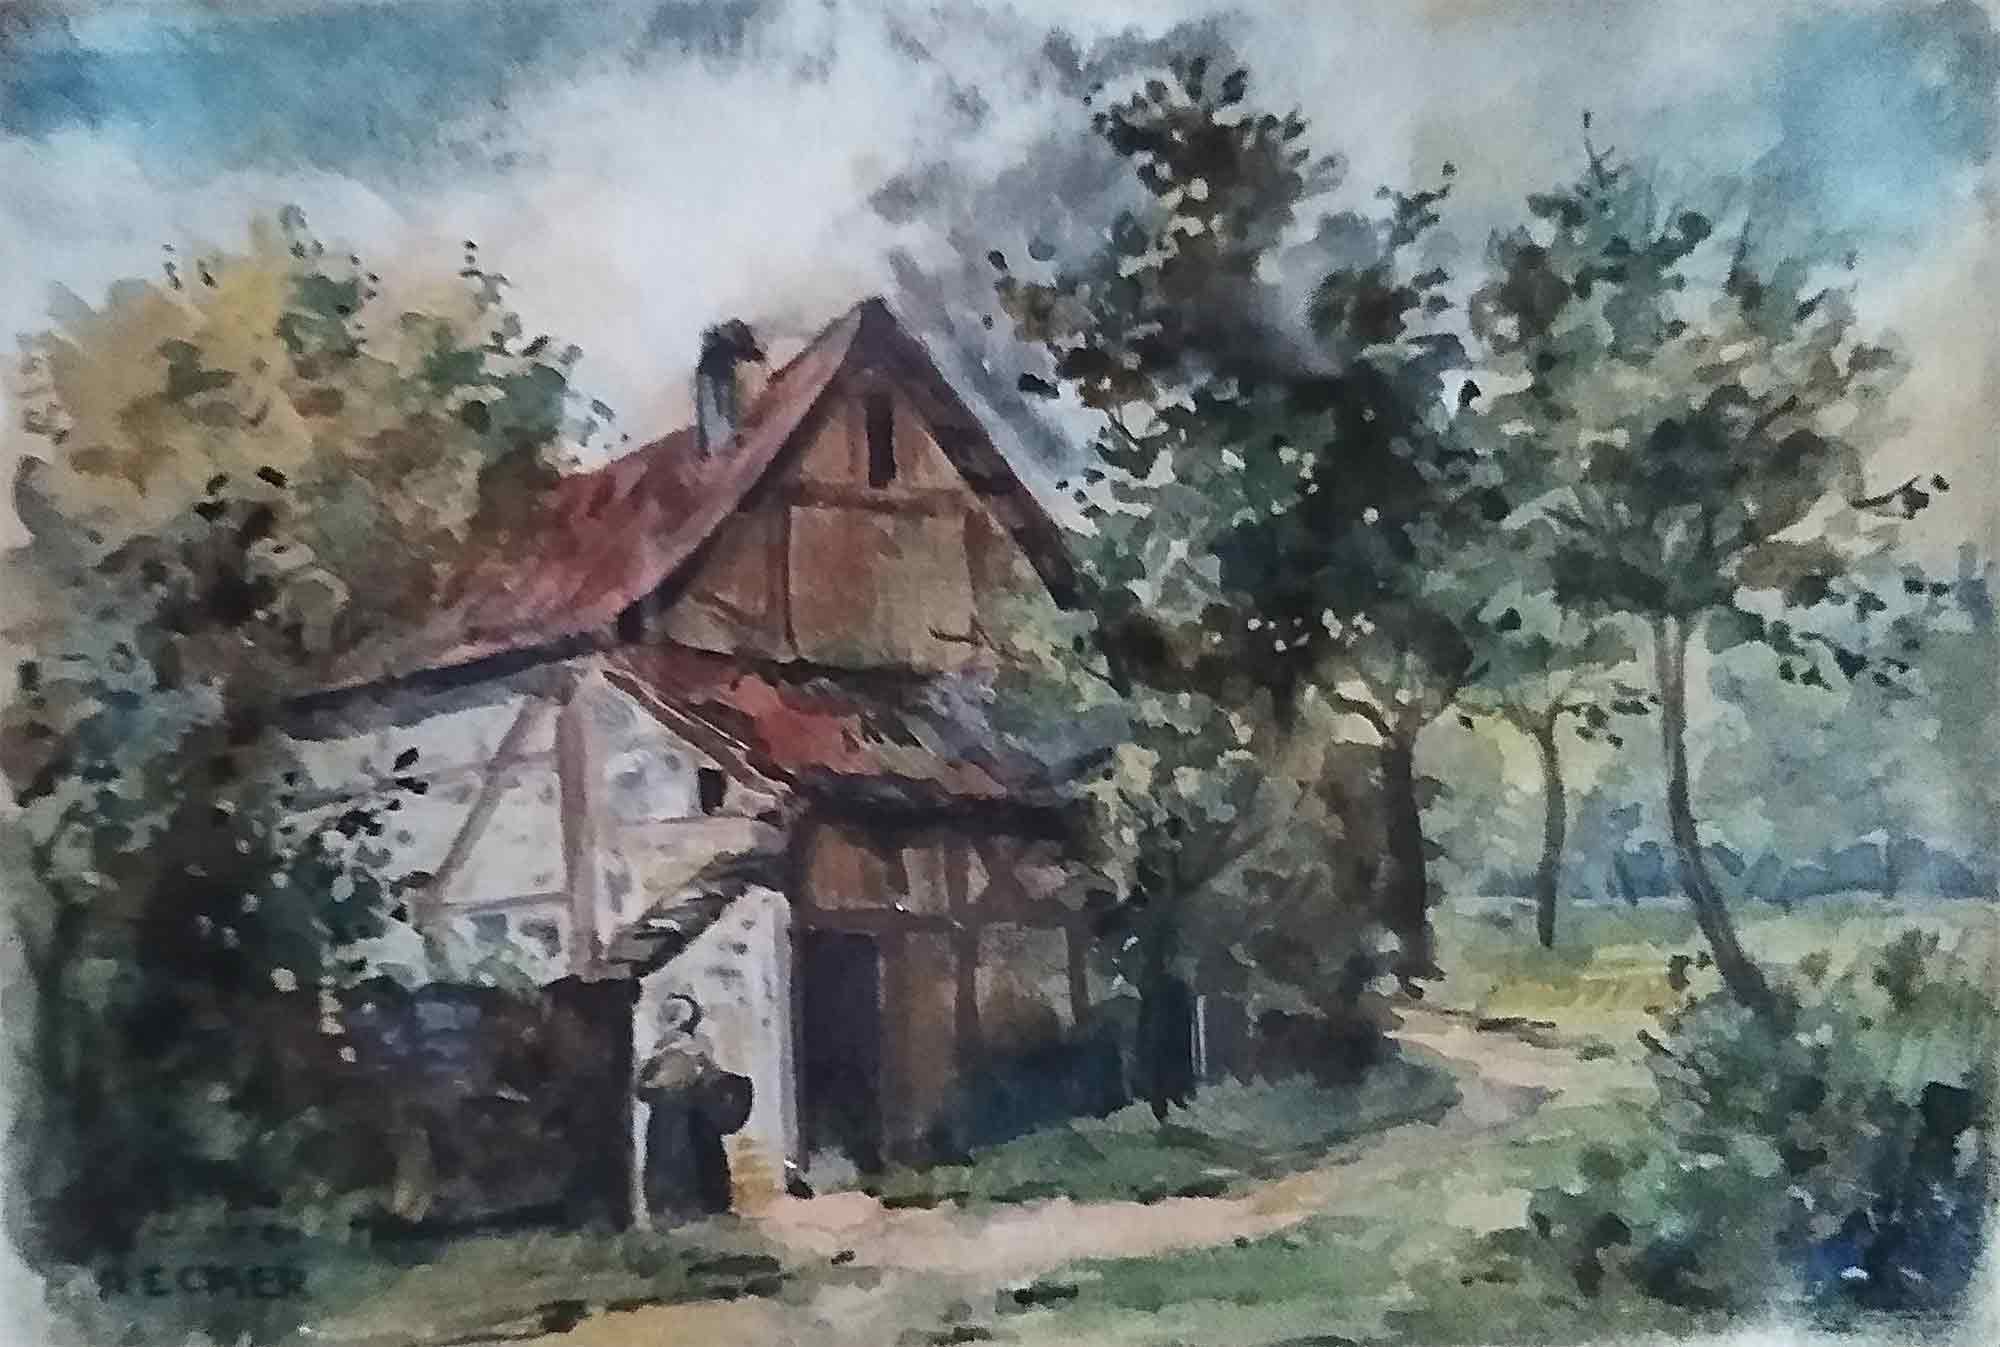 'Cottage' Watercolour by Harry Becker